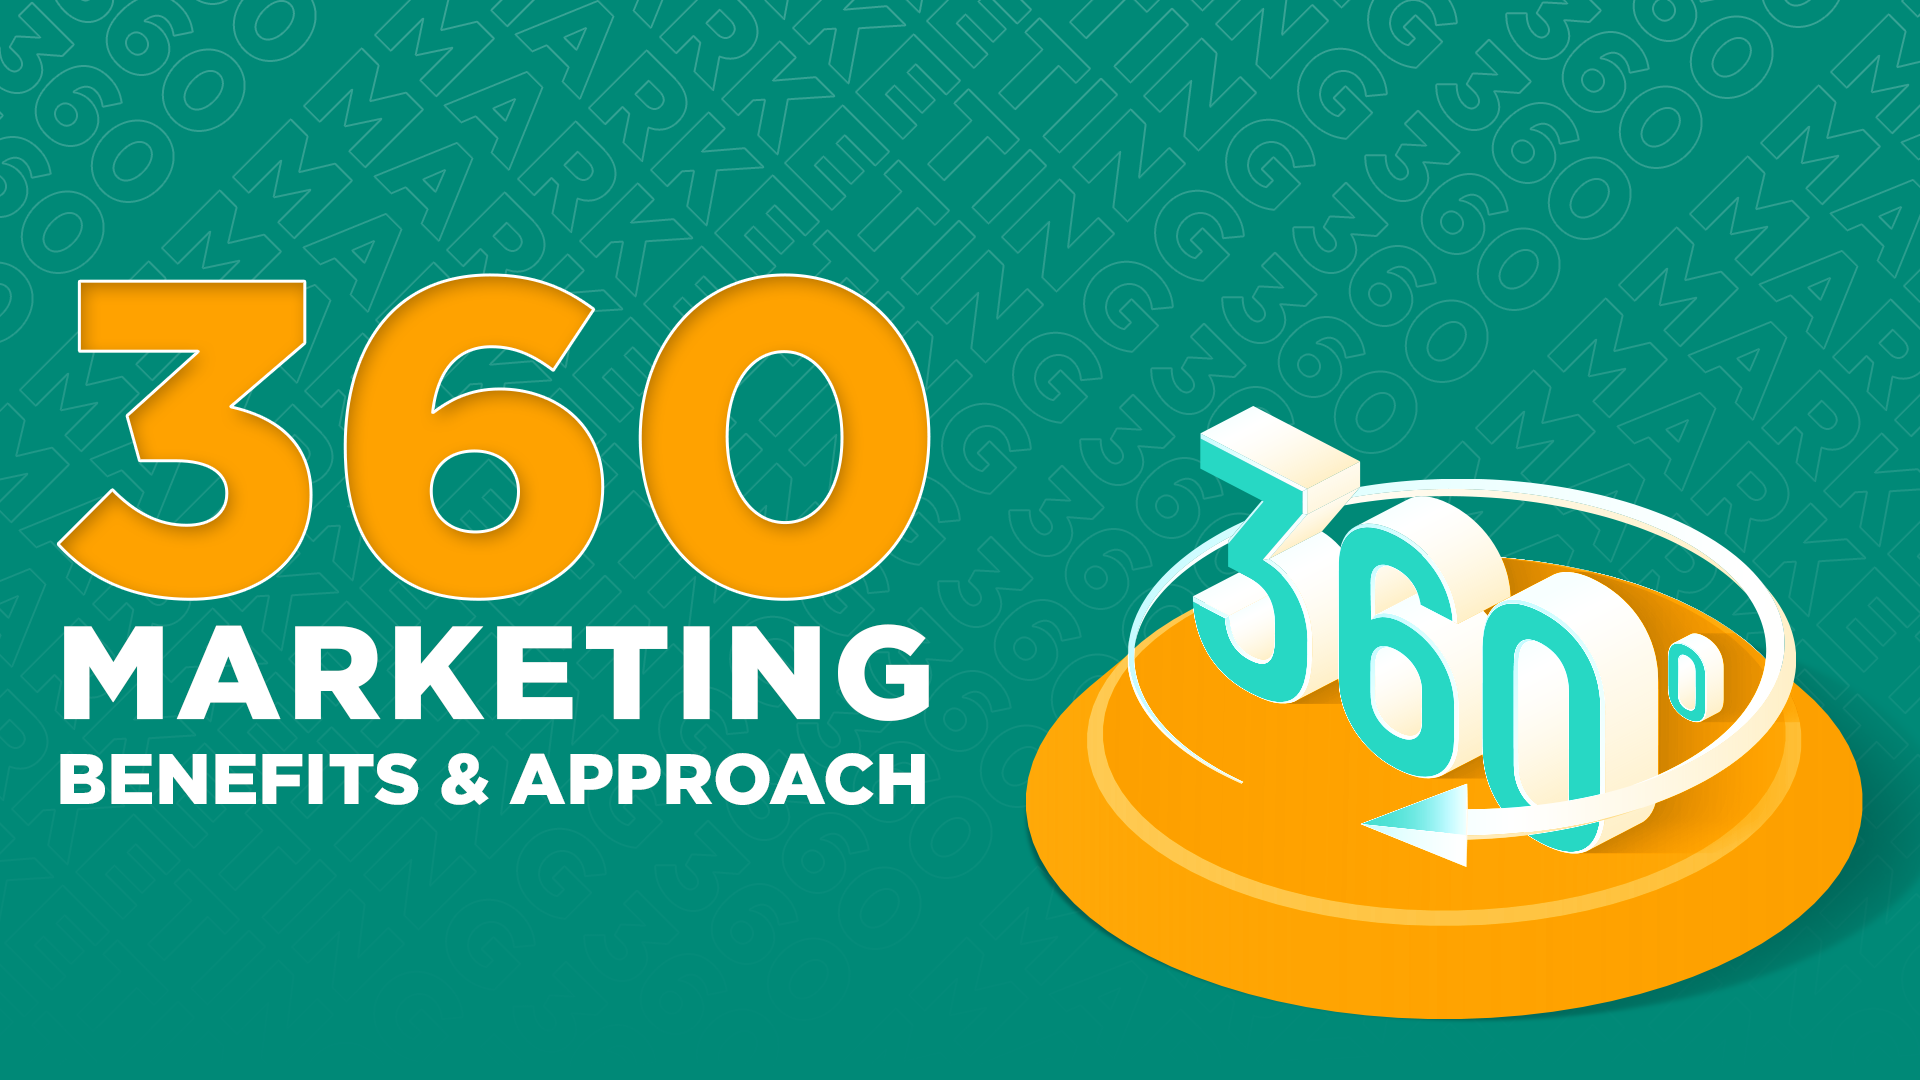 The Benefits of Implementing A 360 Marketing Approach